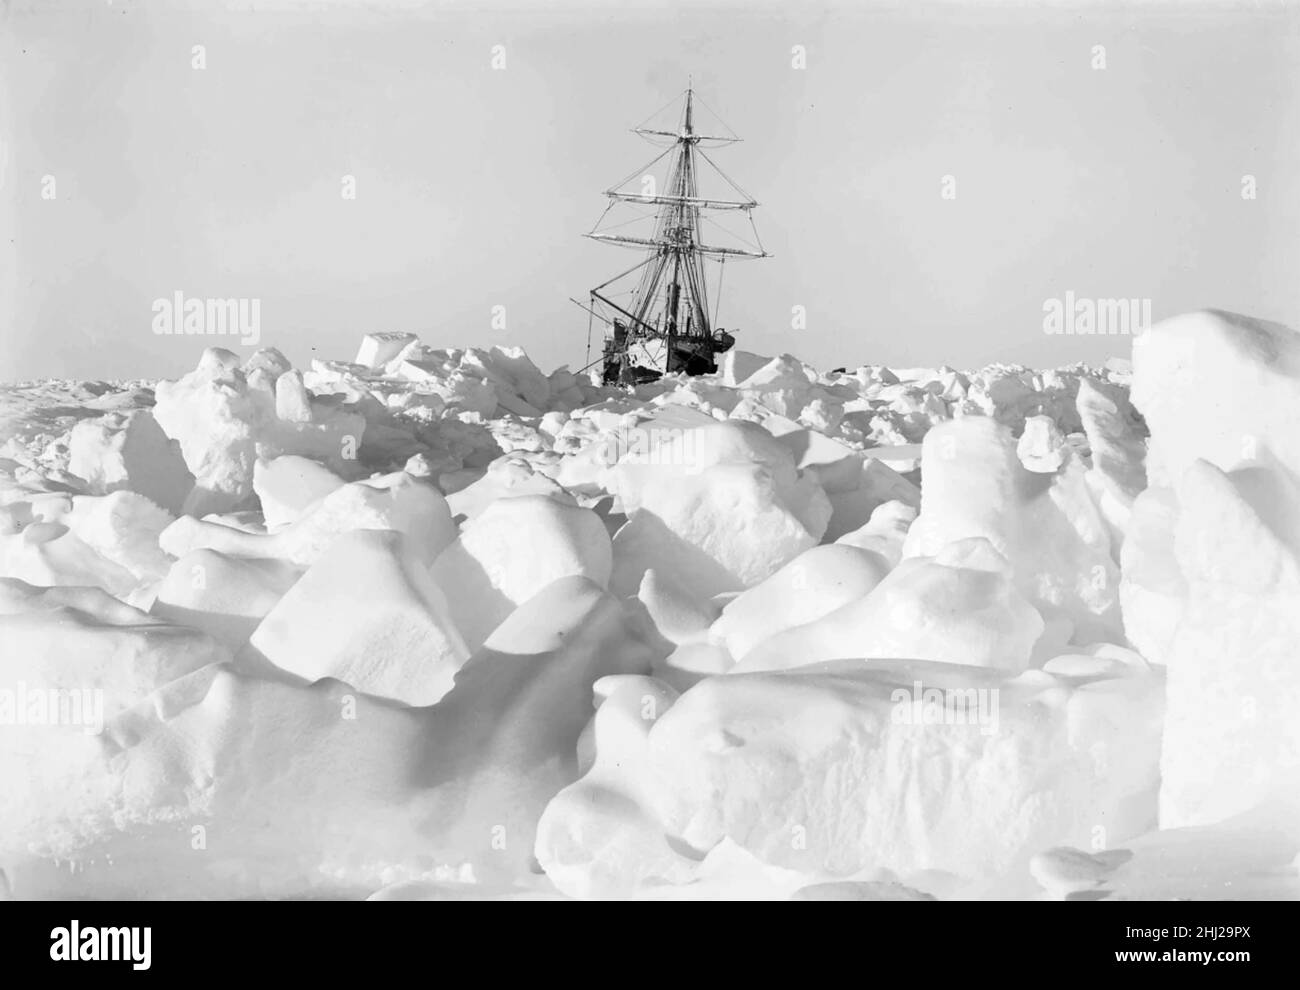 THE ENDURANCE trapped in ice during Robert Shackleton's Imperial Trans-Antarctic Expedition in 1916. Photo: Frank Hurley Stock Photo